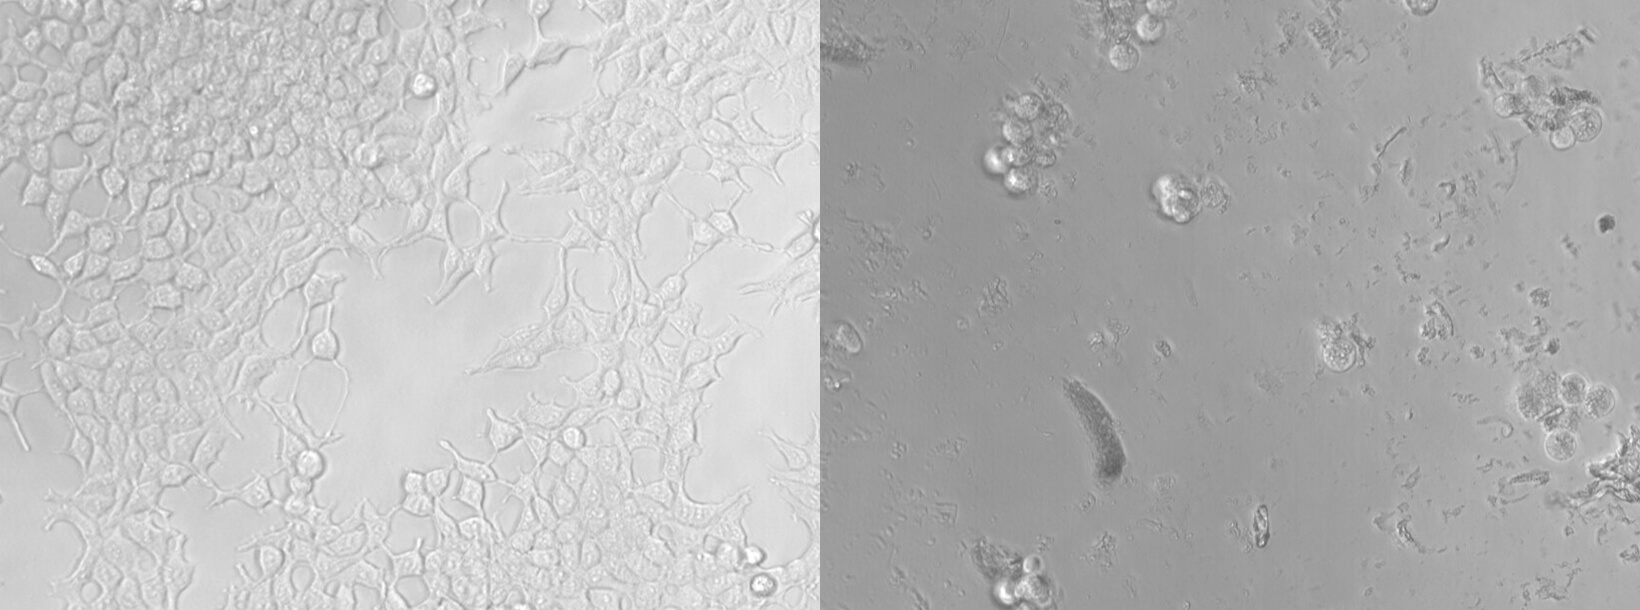 A side-by-side comparison of embryonic kidney cells left untreated (left) versus those treated with micro- and nanoplastics (right) for 72 hours. 